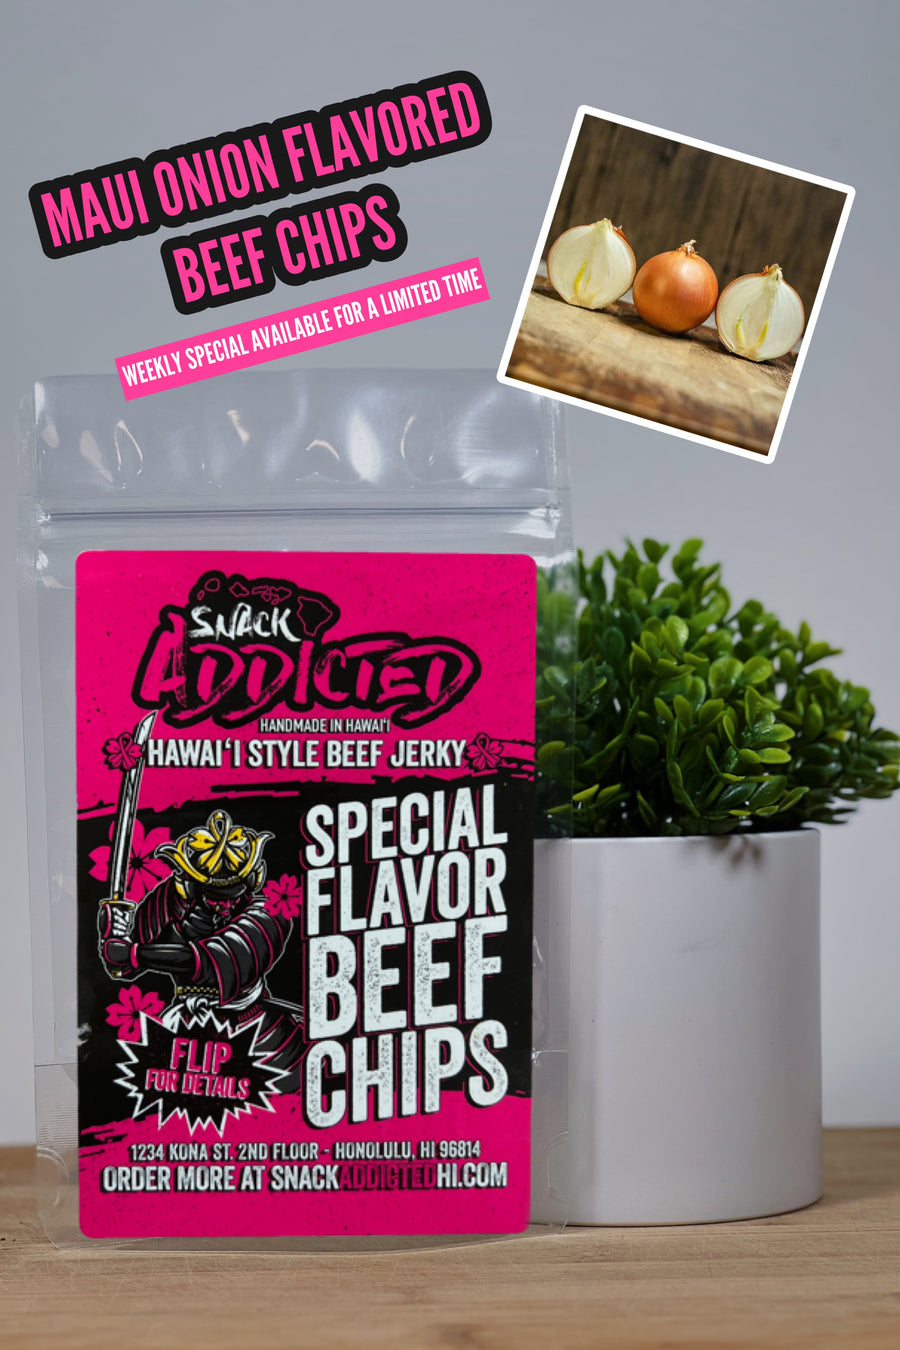 Maui Onion Flavored Beef Chips